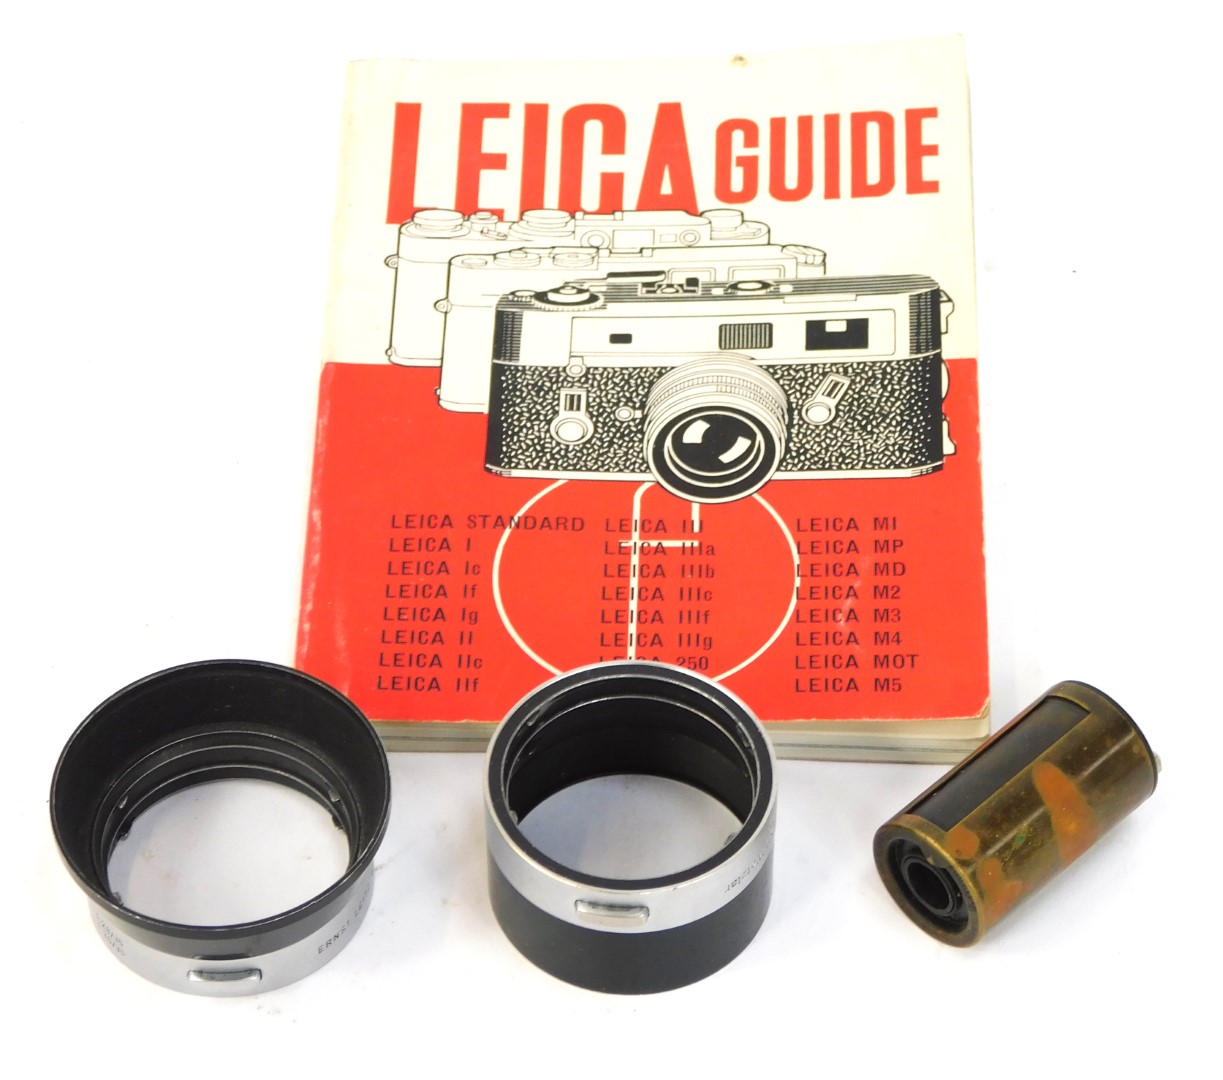 A Leica Reloadable cassette, 50mm lens hood, and a Leica guide book. (3)